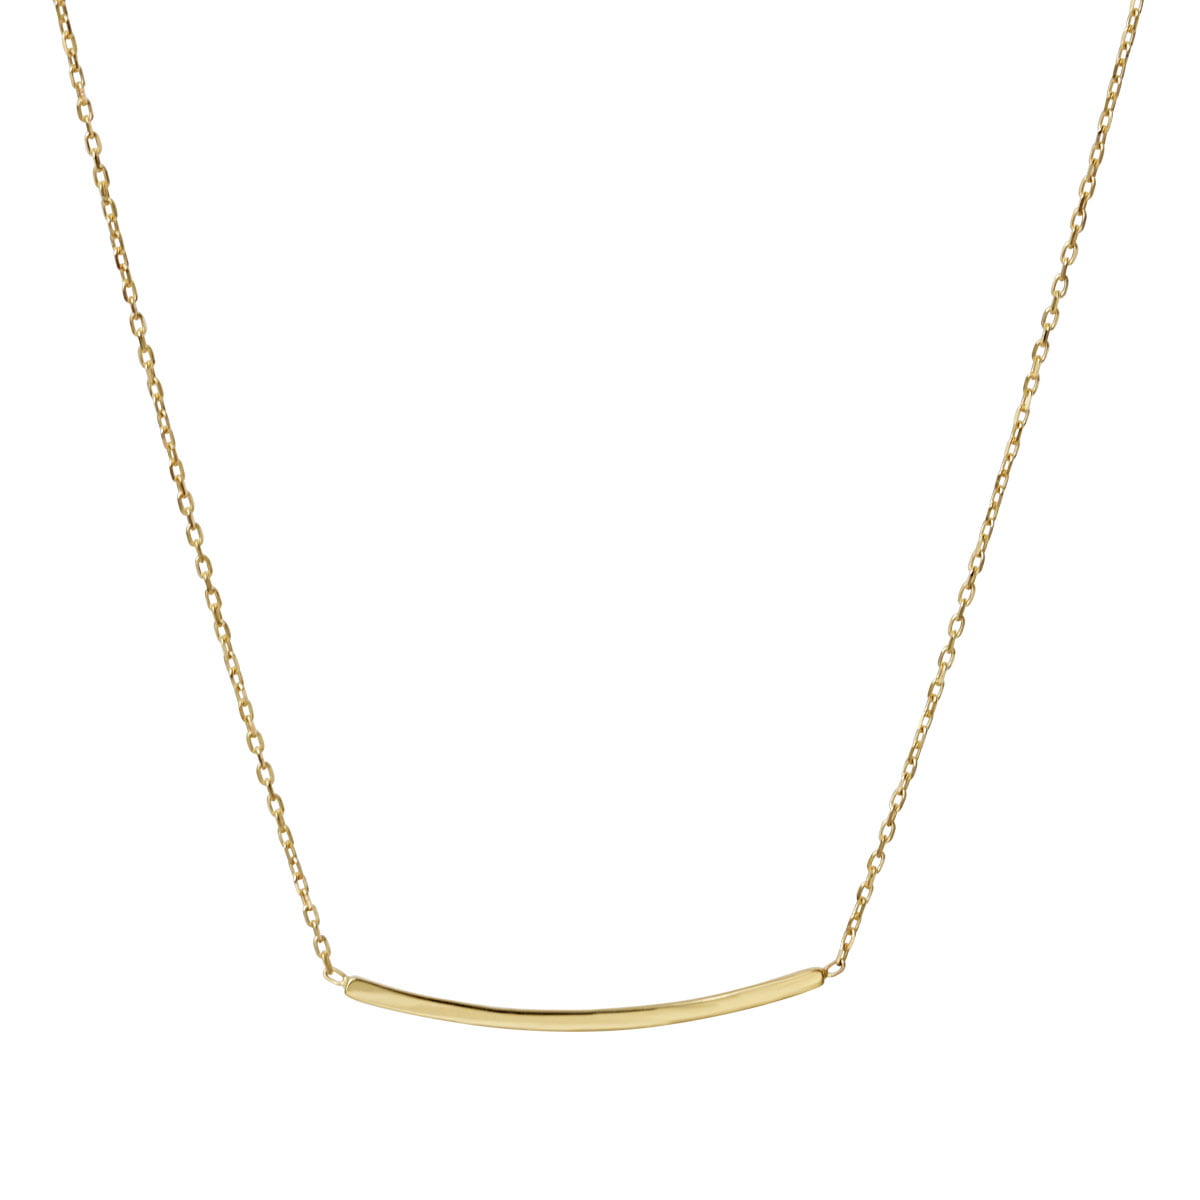 18ct Yellow Solid Gold Curved Bar Chain Necklace